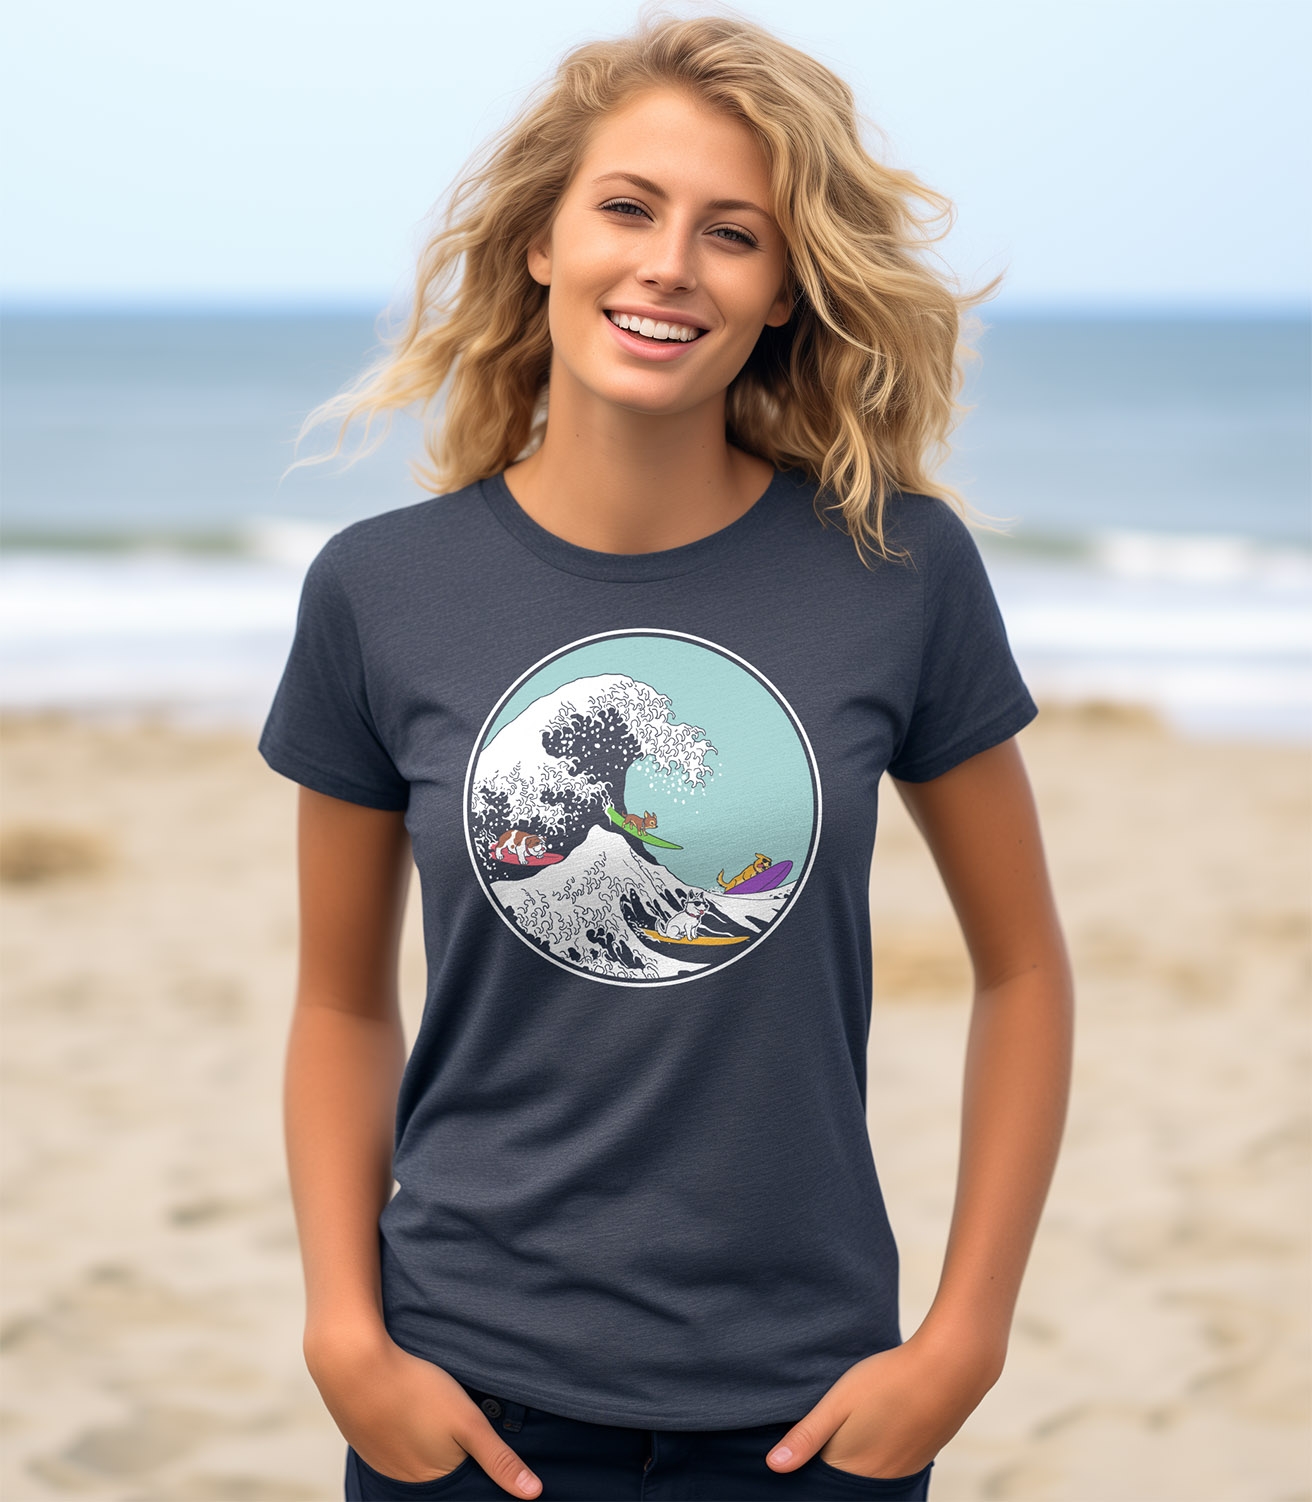 Dogs Ridin' The Wave Women's Cotton/Poly T-Shirt